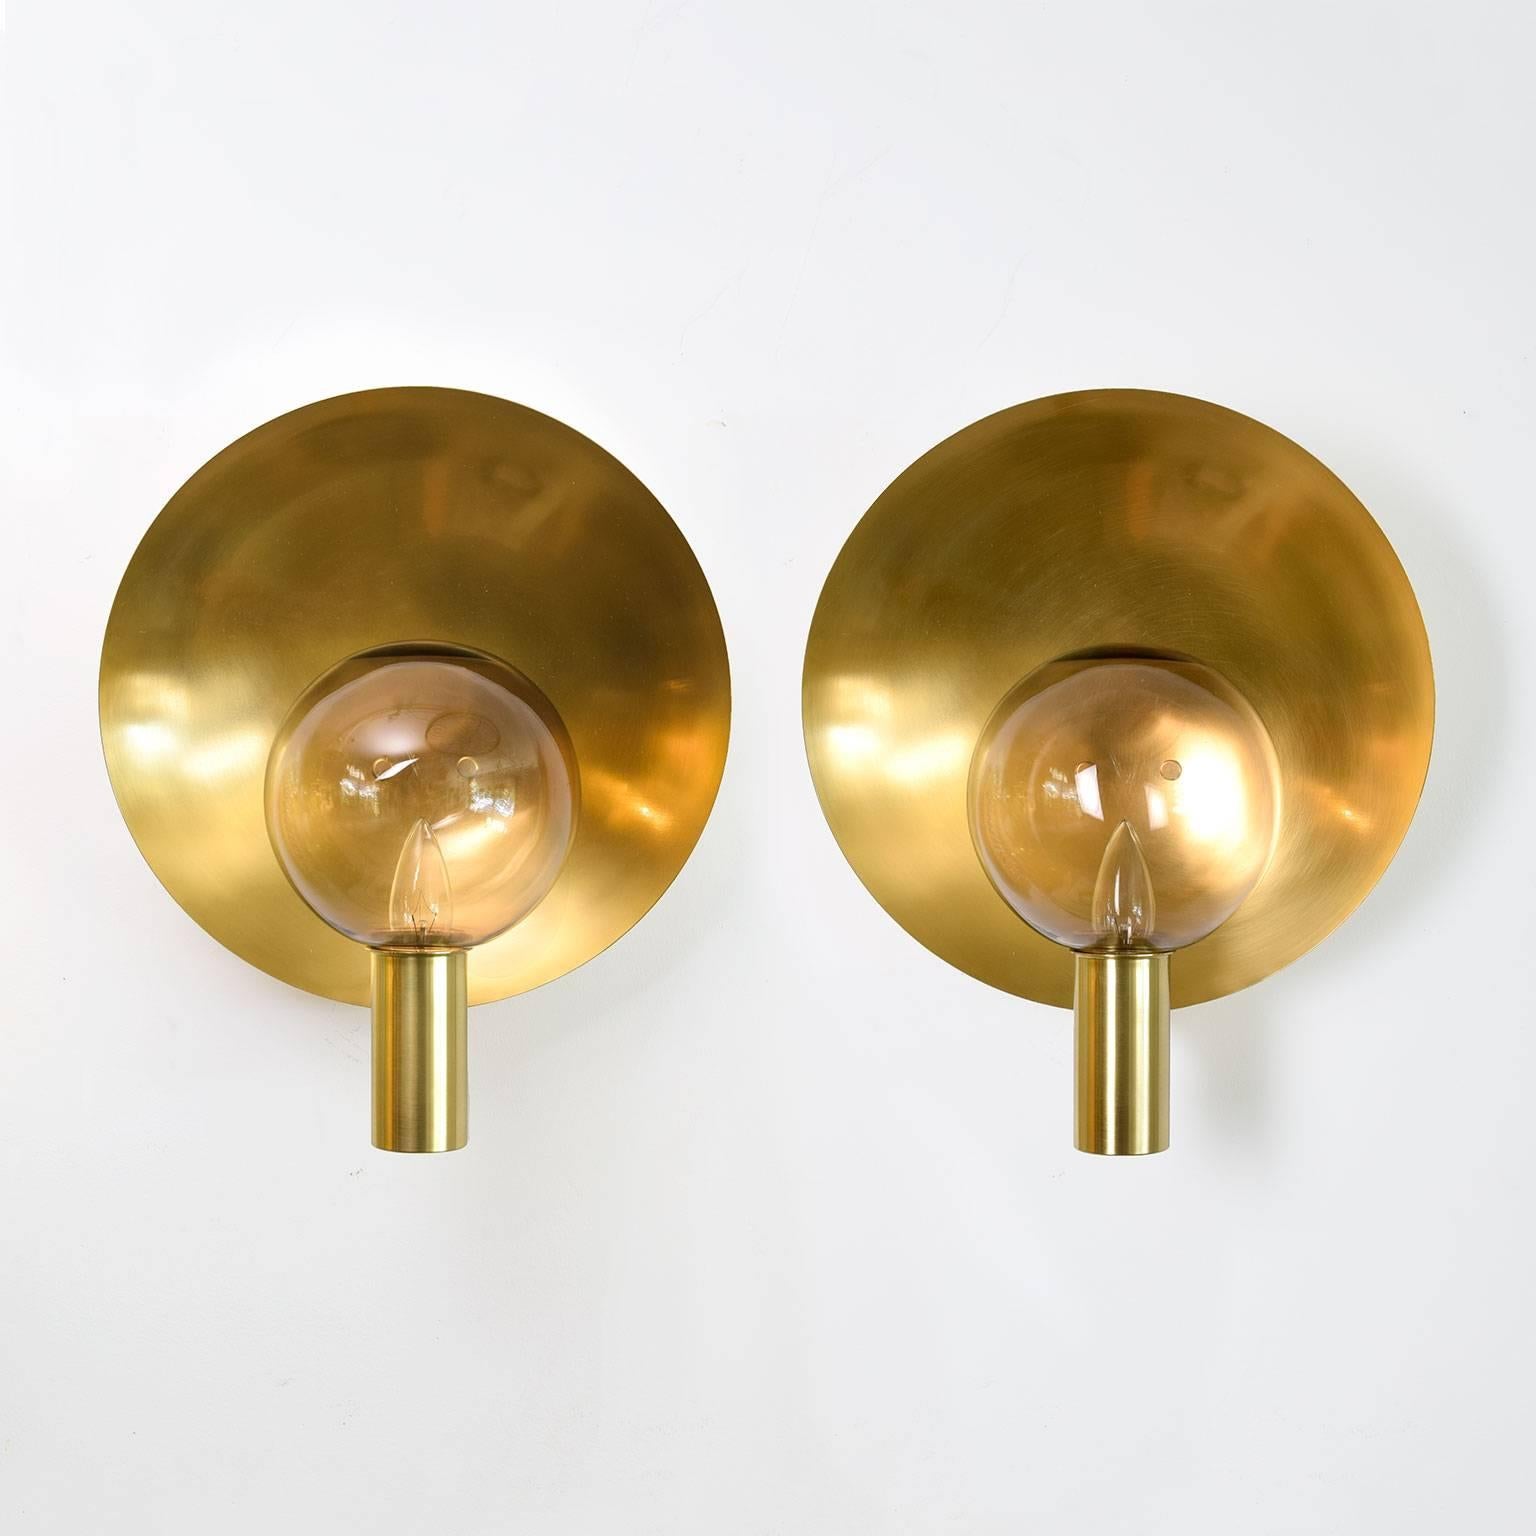 Large pair of Scandinavian Modern polished brass sconces with glass sphere shades. Designed by Hans-Agne Jakobsson for Markaryd, Sweden, circa 1960s. Newly polished and lacquered, newly rewired for use in the USA, each sconces has a single